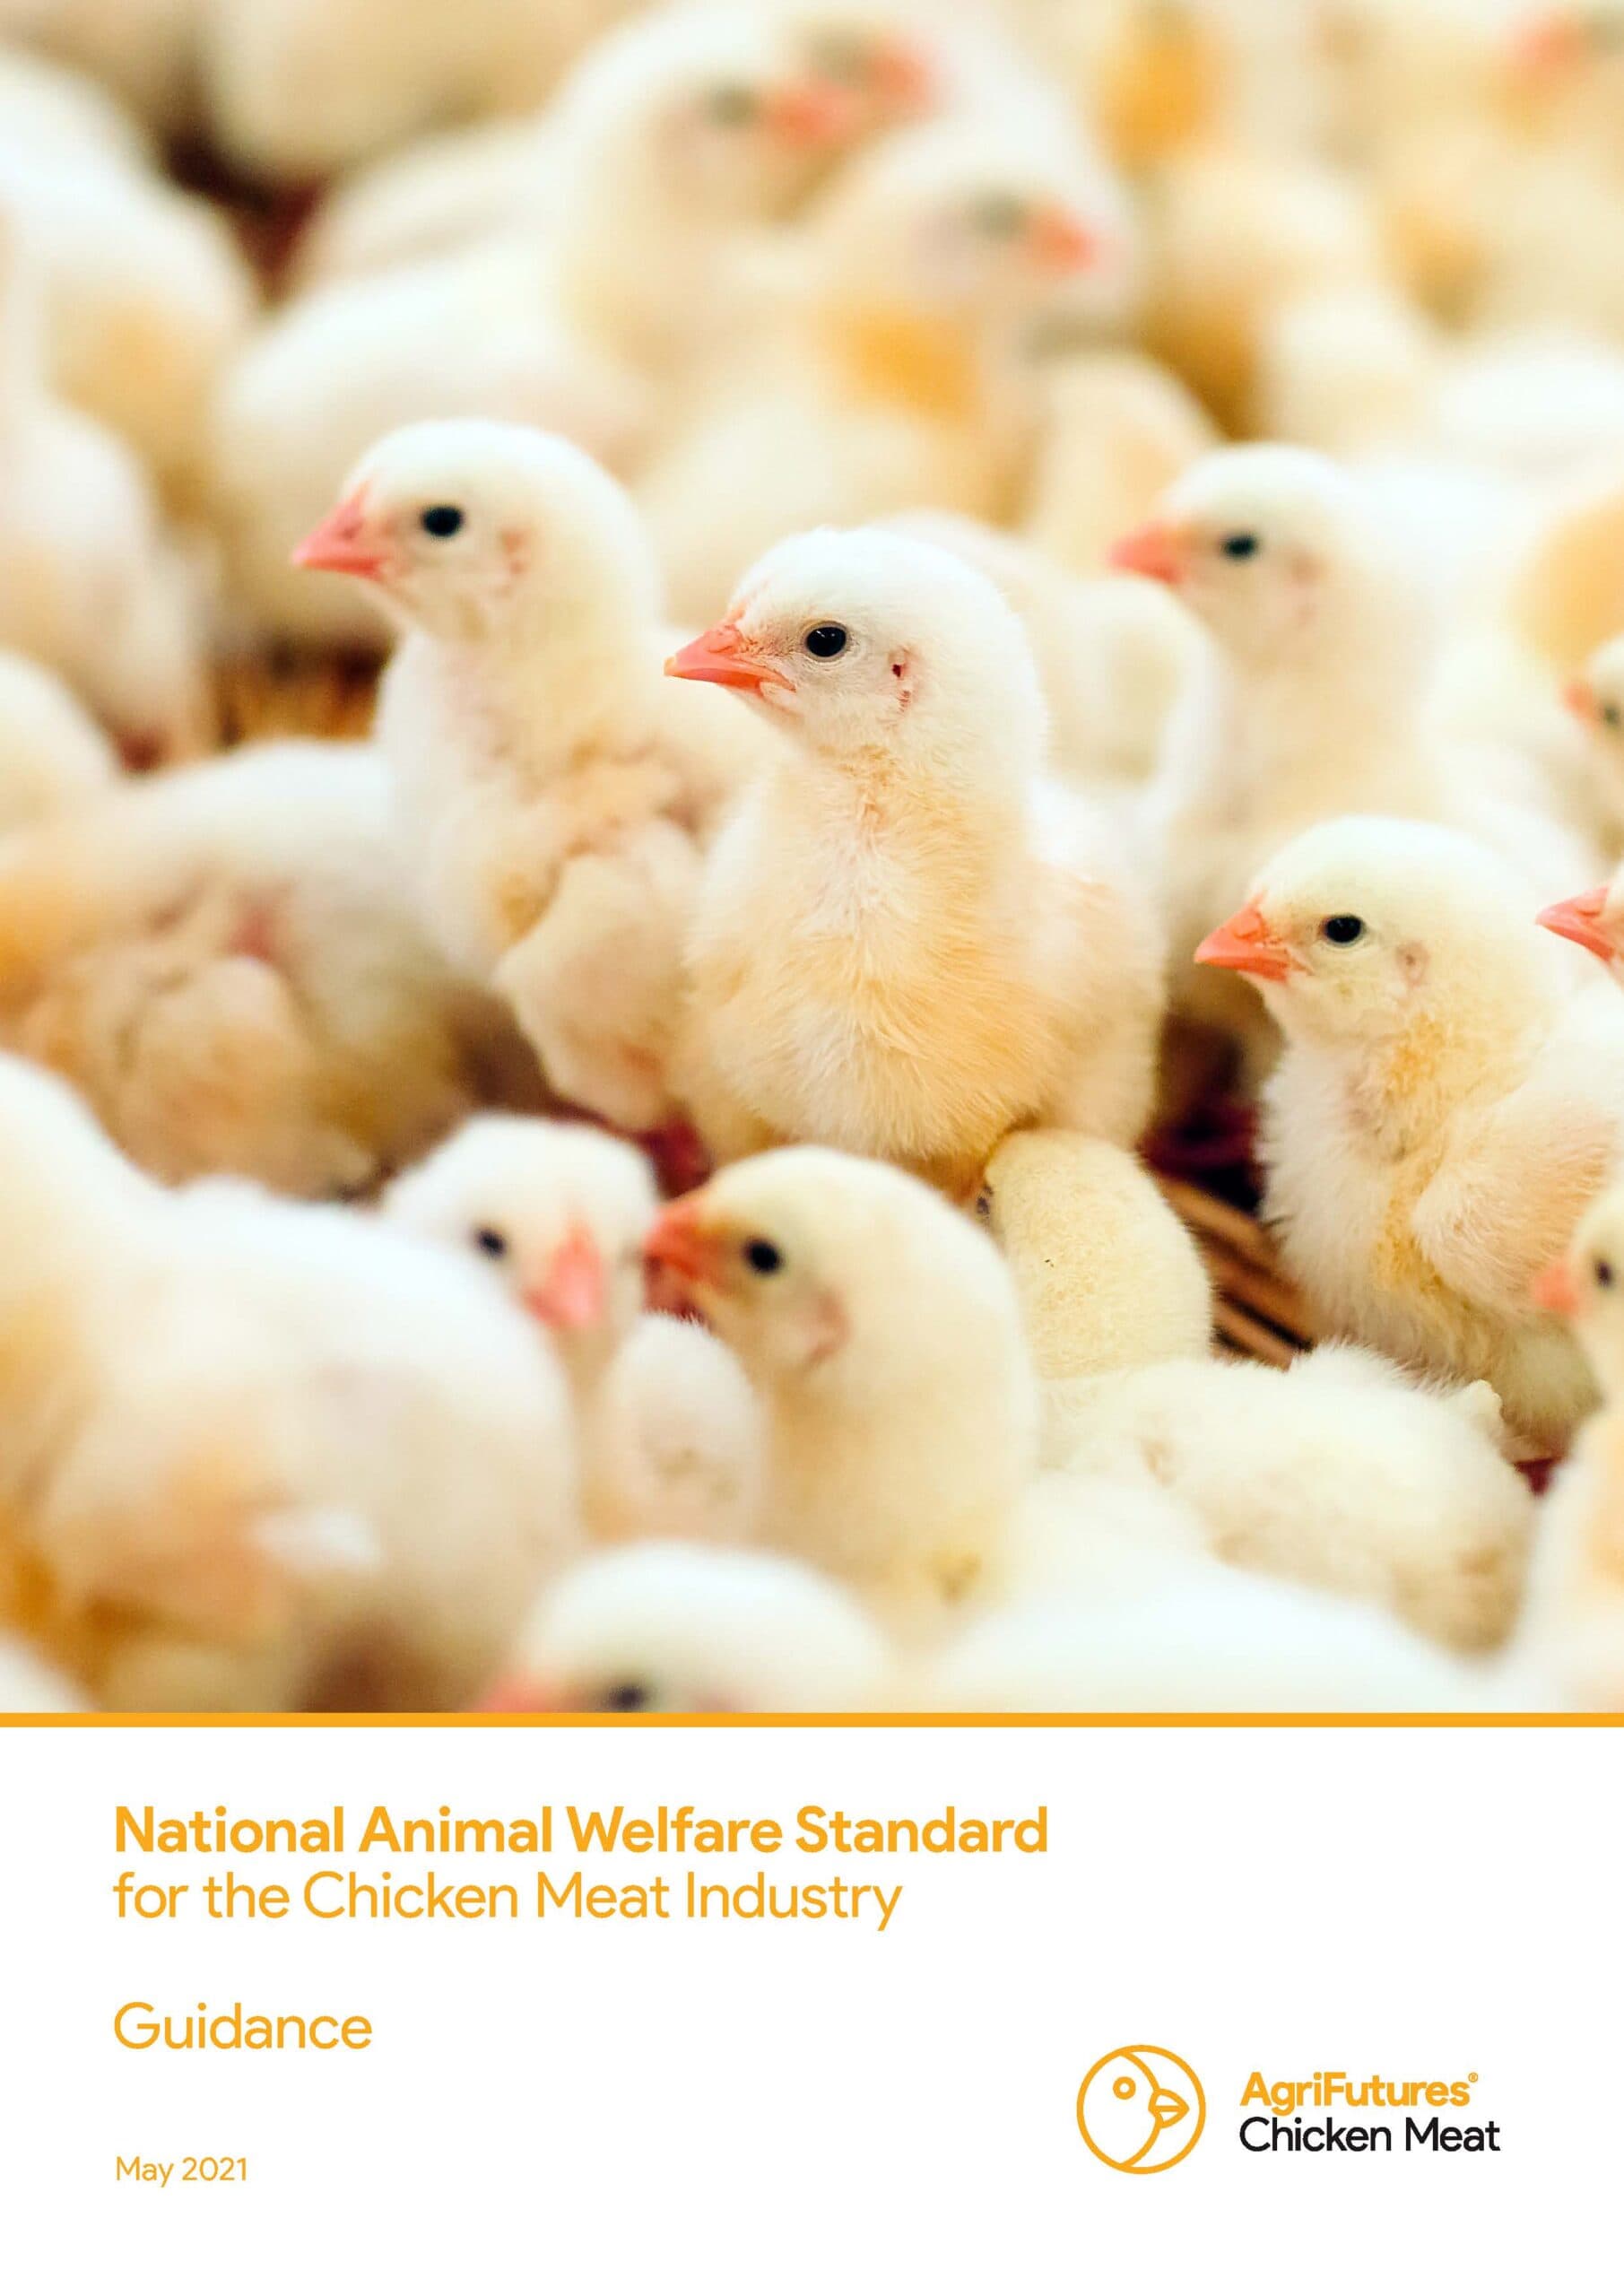 National Animal Welfare Standard for the Chicken Meat Industry - Guidance material - image